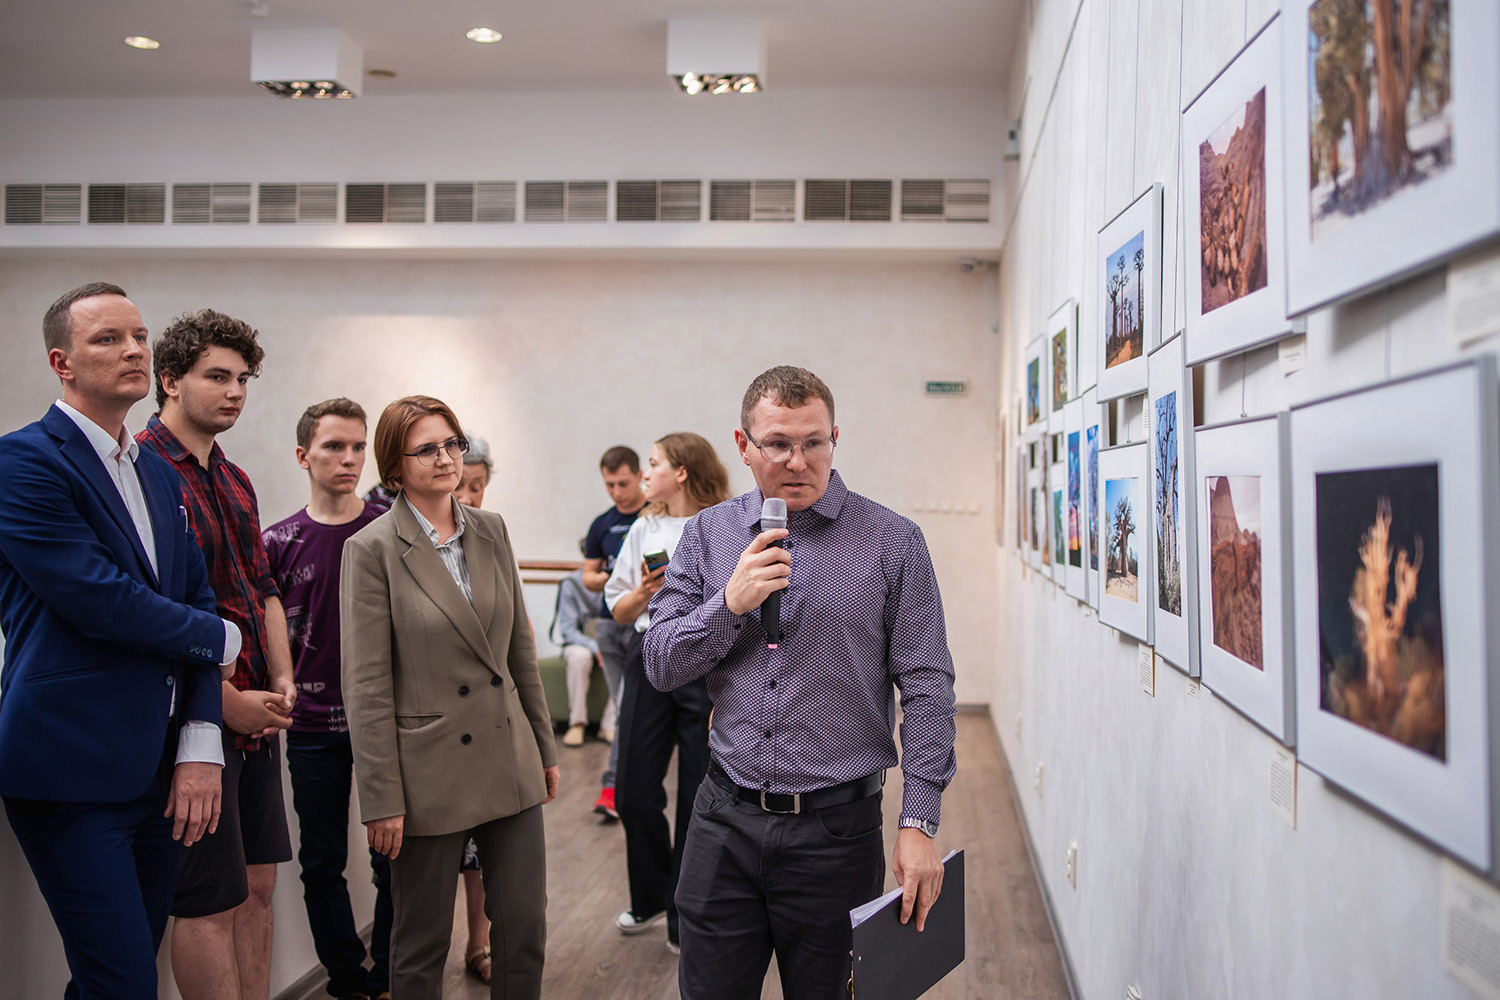 the solo exhibition at the Museum of Nature and Man, located in Khanty-Mansiysk